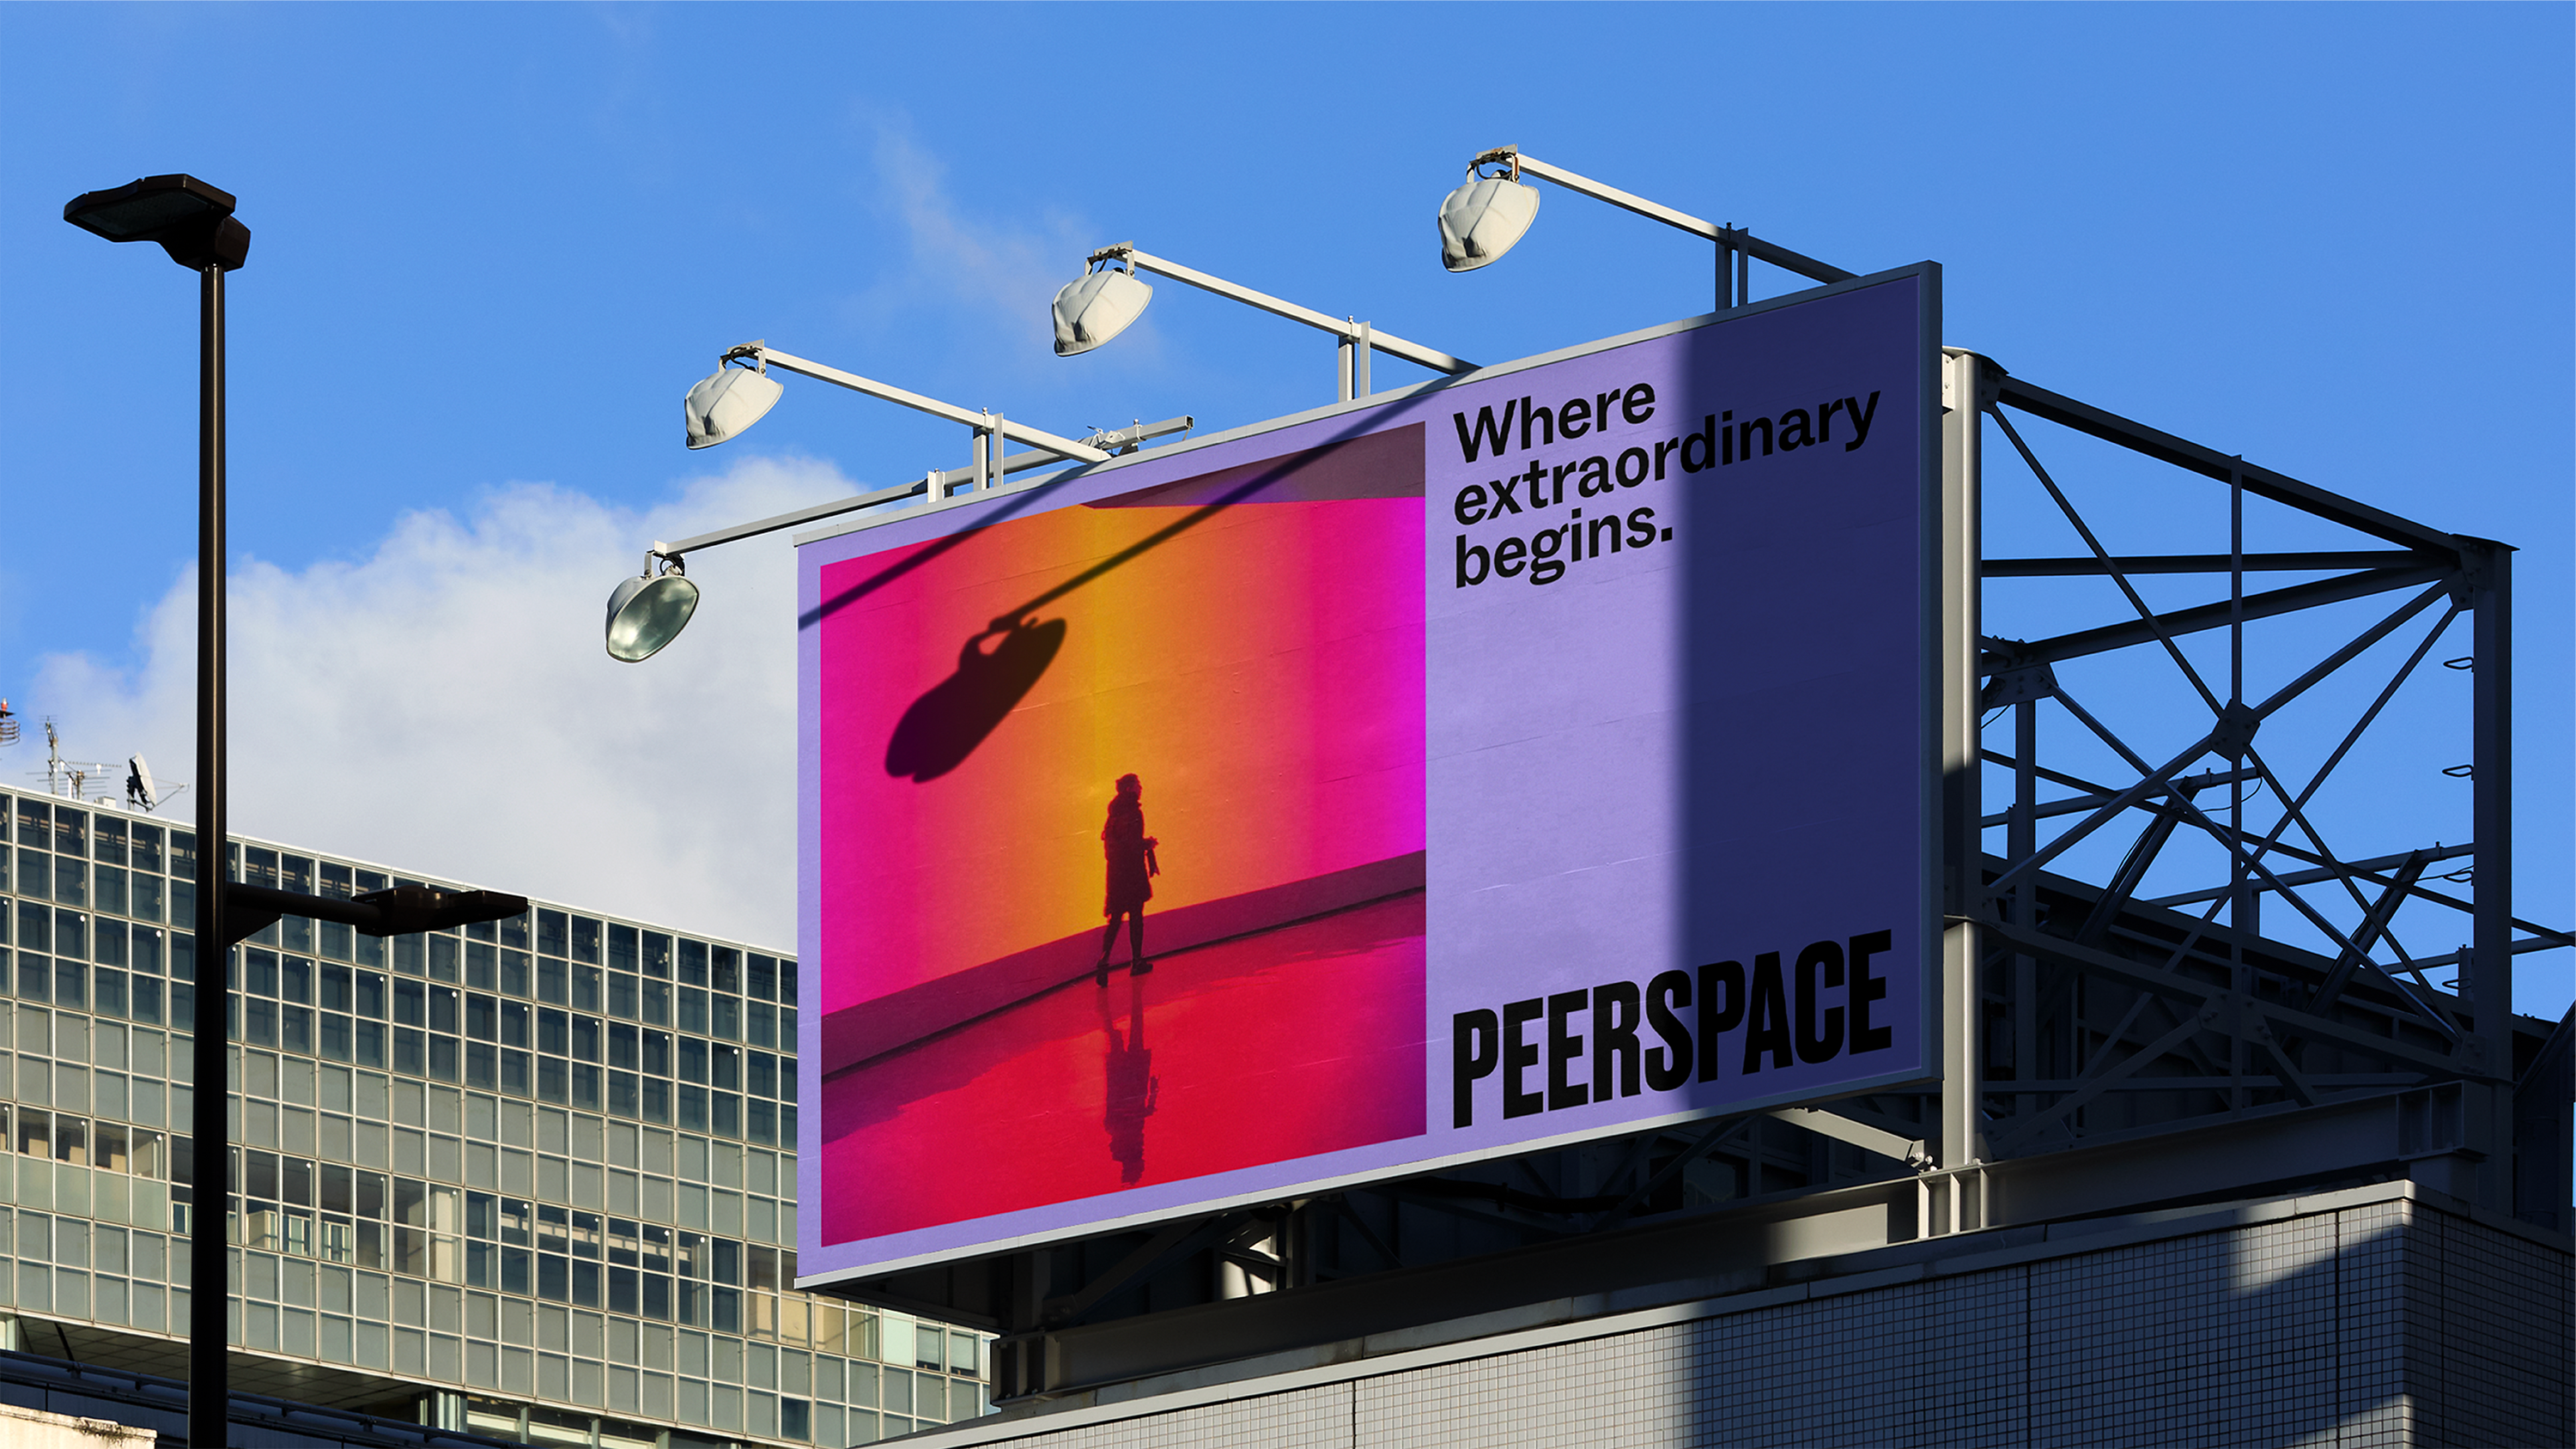 Brand identity and OOH advertising for peer-owned venue business Peerspace, designed by Mother Design. Reviewed by Eleanor Robertson for BP&O.